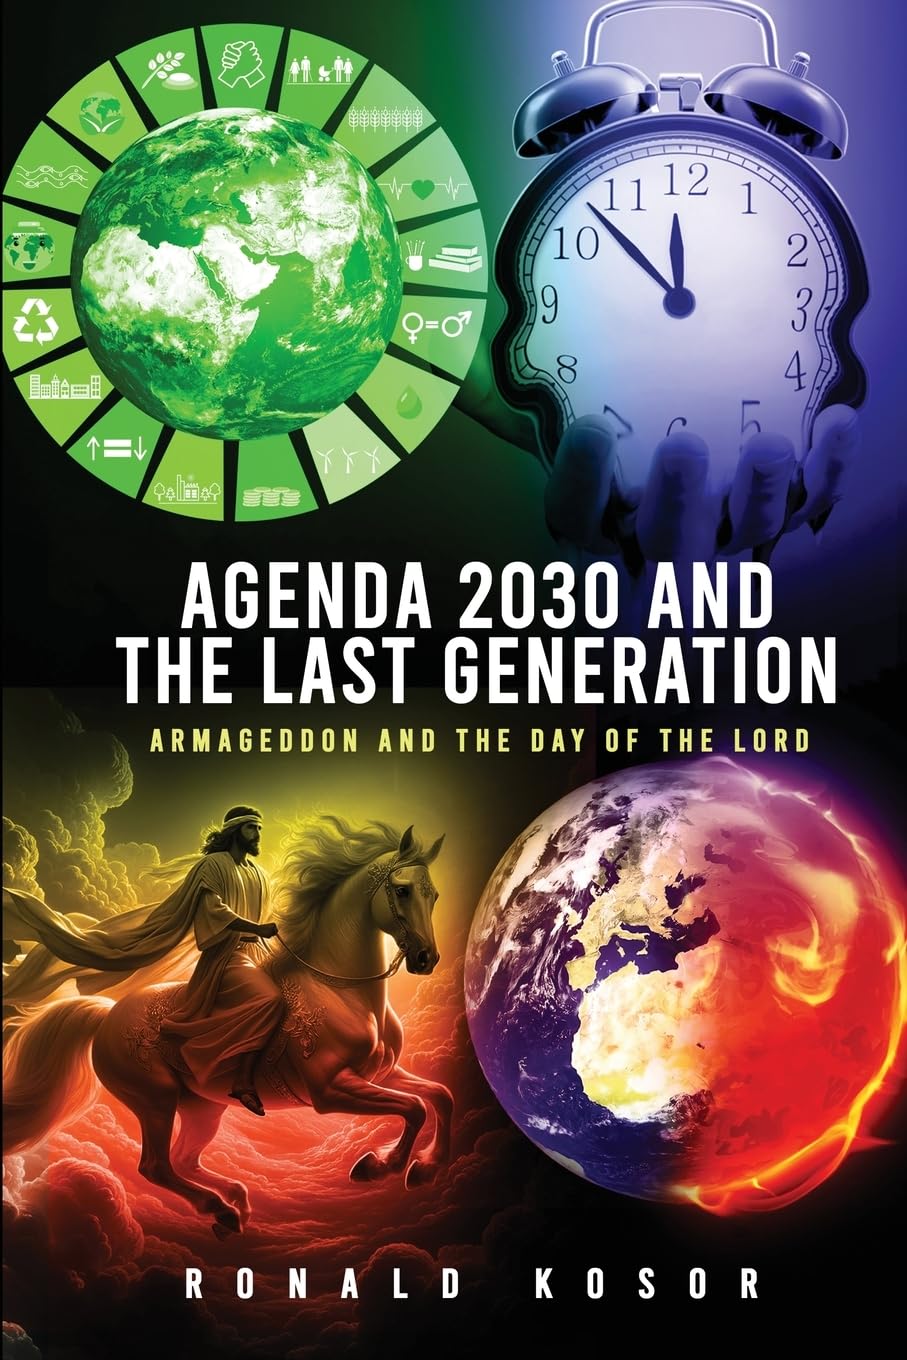 New book "Agenda 2030 and The Last Generation" by Ronald Kosor is released, an insightful examination of biblical prophecy, Armageddon, and the truth about a divinely appointed period of time